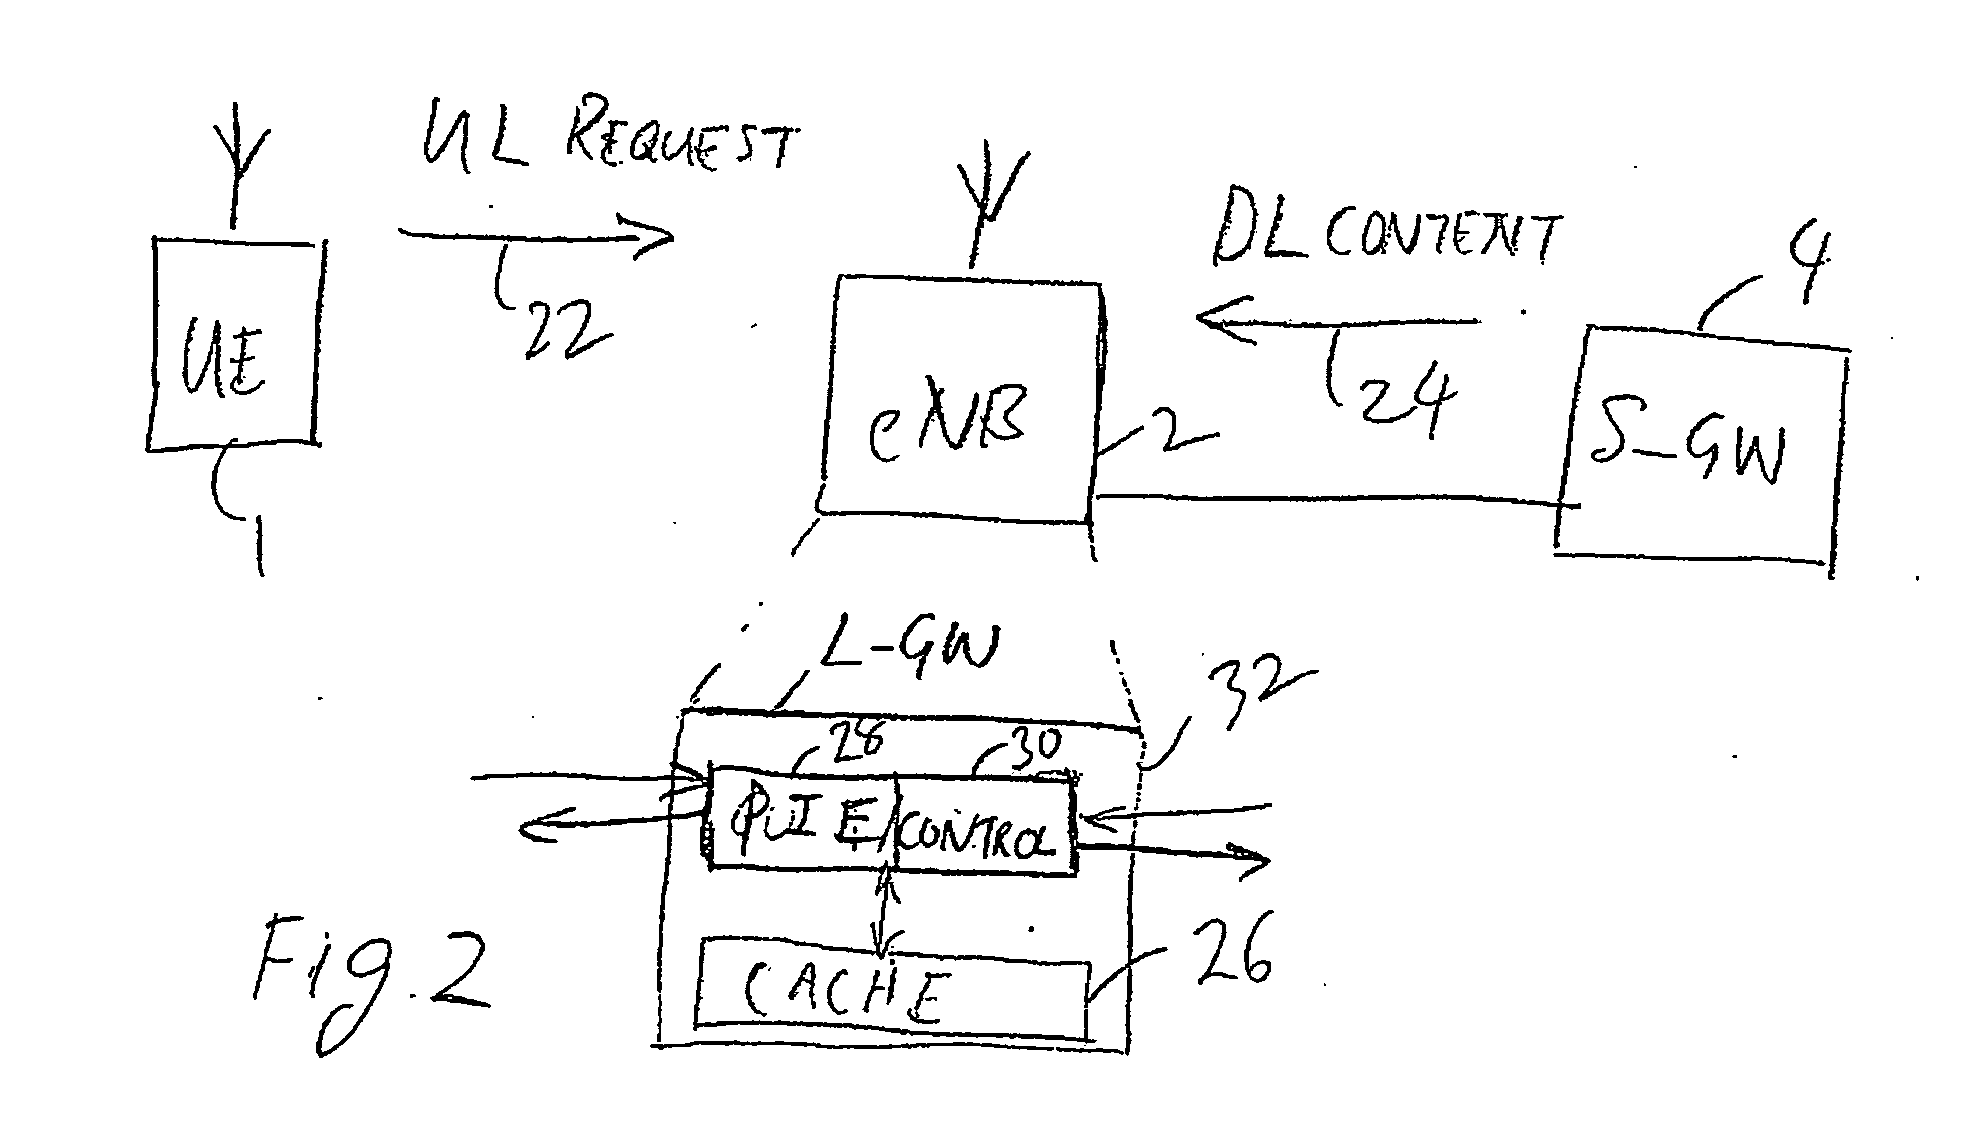 Local storage of content in a wireless network